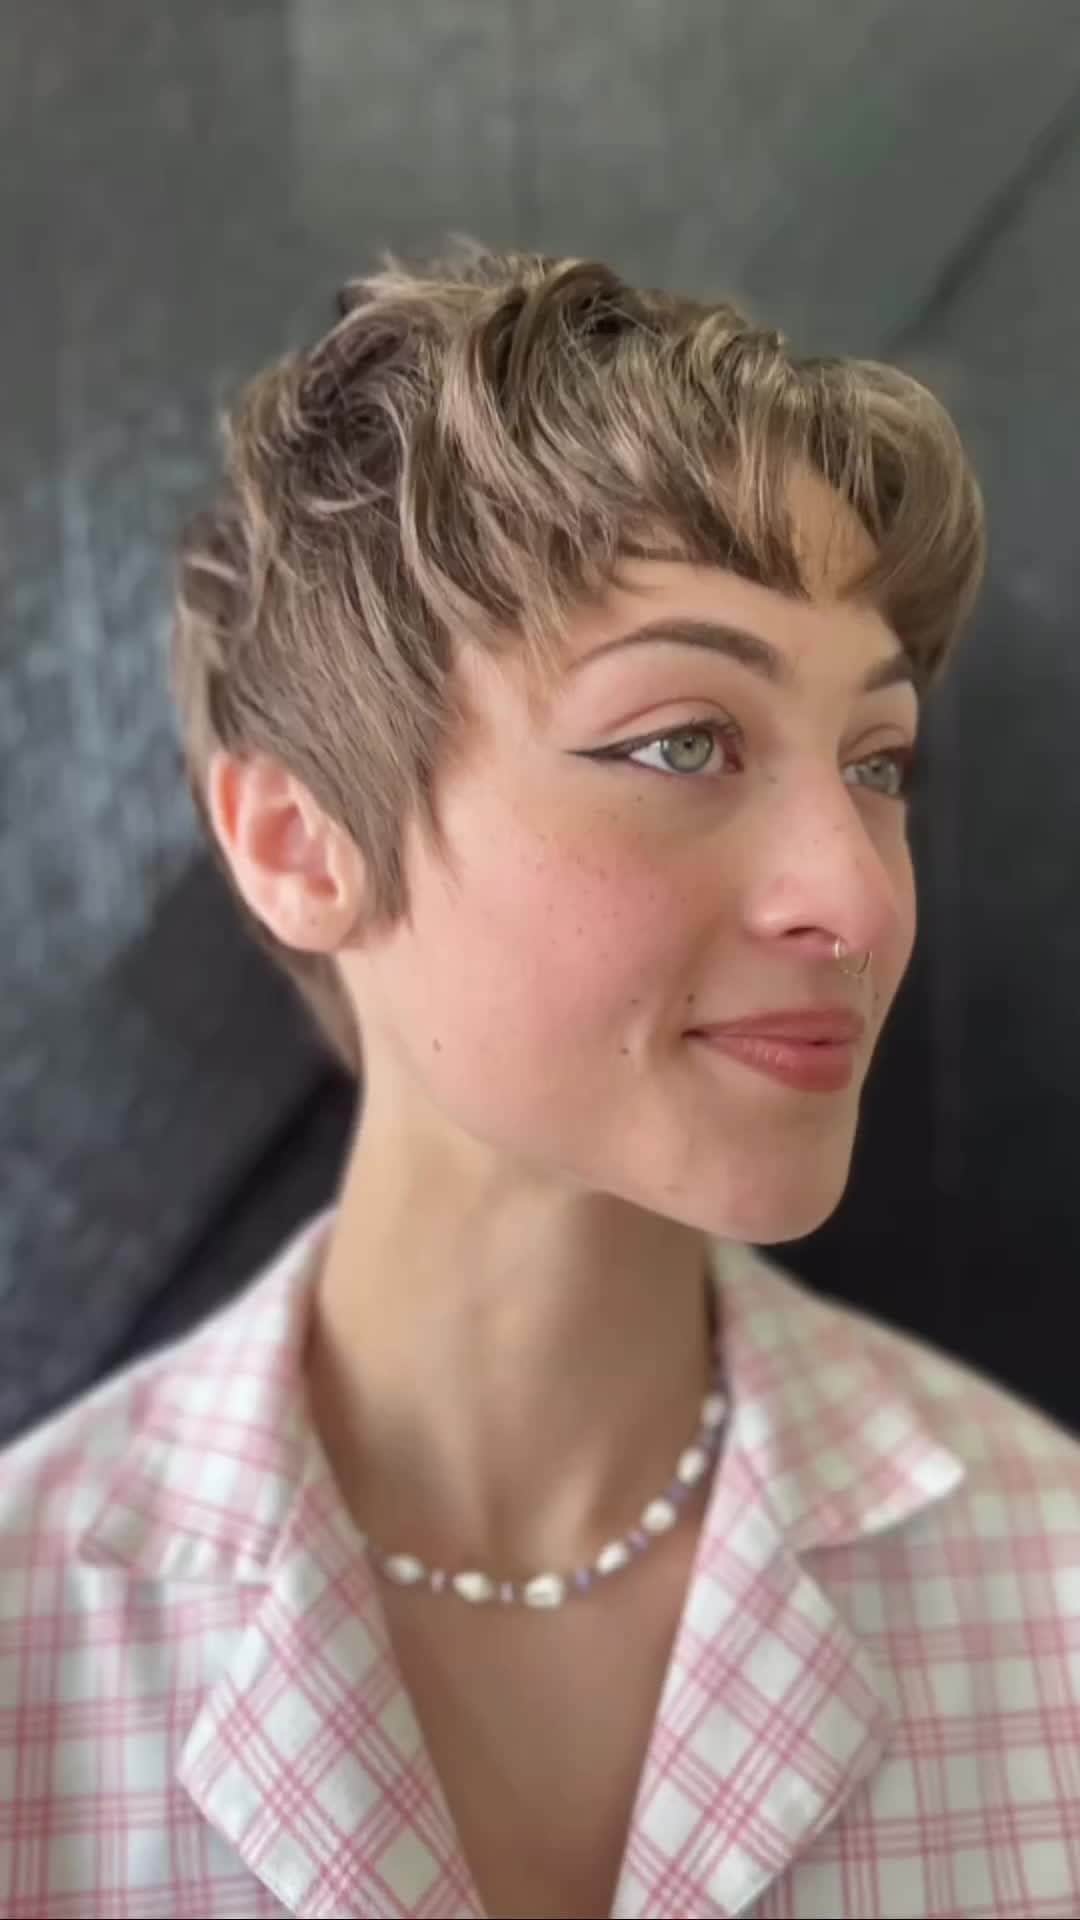 Sam Villaのインスタグラム：「Razor pixie by stylist @sarahmarie.beautyboss⁠ ⁠ Why do we love this cut? This style not only showcases your confidence but also adds a touch of playful elegance to your vibe. The razor technique gives us the power to create texture and movement, ensuring your pixie is uniquely you. ⁠ ⁠ "Perfection is found in accepting your imperfections⁠ ⁠ This pixie on this client was such a VIBE. This was shortest cut we had did thus far. Getting to create such a fun cut and then getting style after gave me all the feels. I’m so obsessed with this cut" - @sarahmarie.beautyboss⁠ ⁠ #SamVilla⁠ #SamVillaCommunity⁠ .⁠ .⁠ .⁠ .⁠ .⁠ #haircutting #samvilla #hairtutorial #hairvideo #haircut #hairstylist #behindthechair #modernsalon #americansalon #pixie #pixiehaircut #razorcutting」